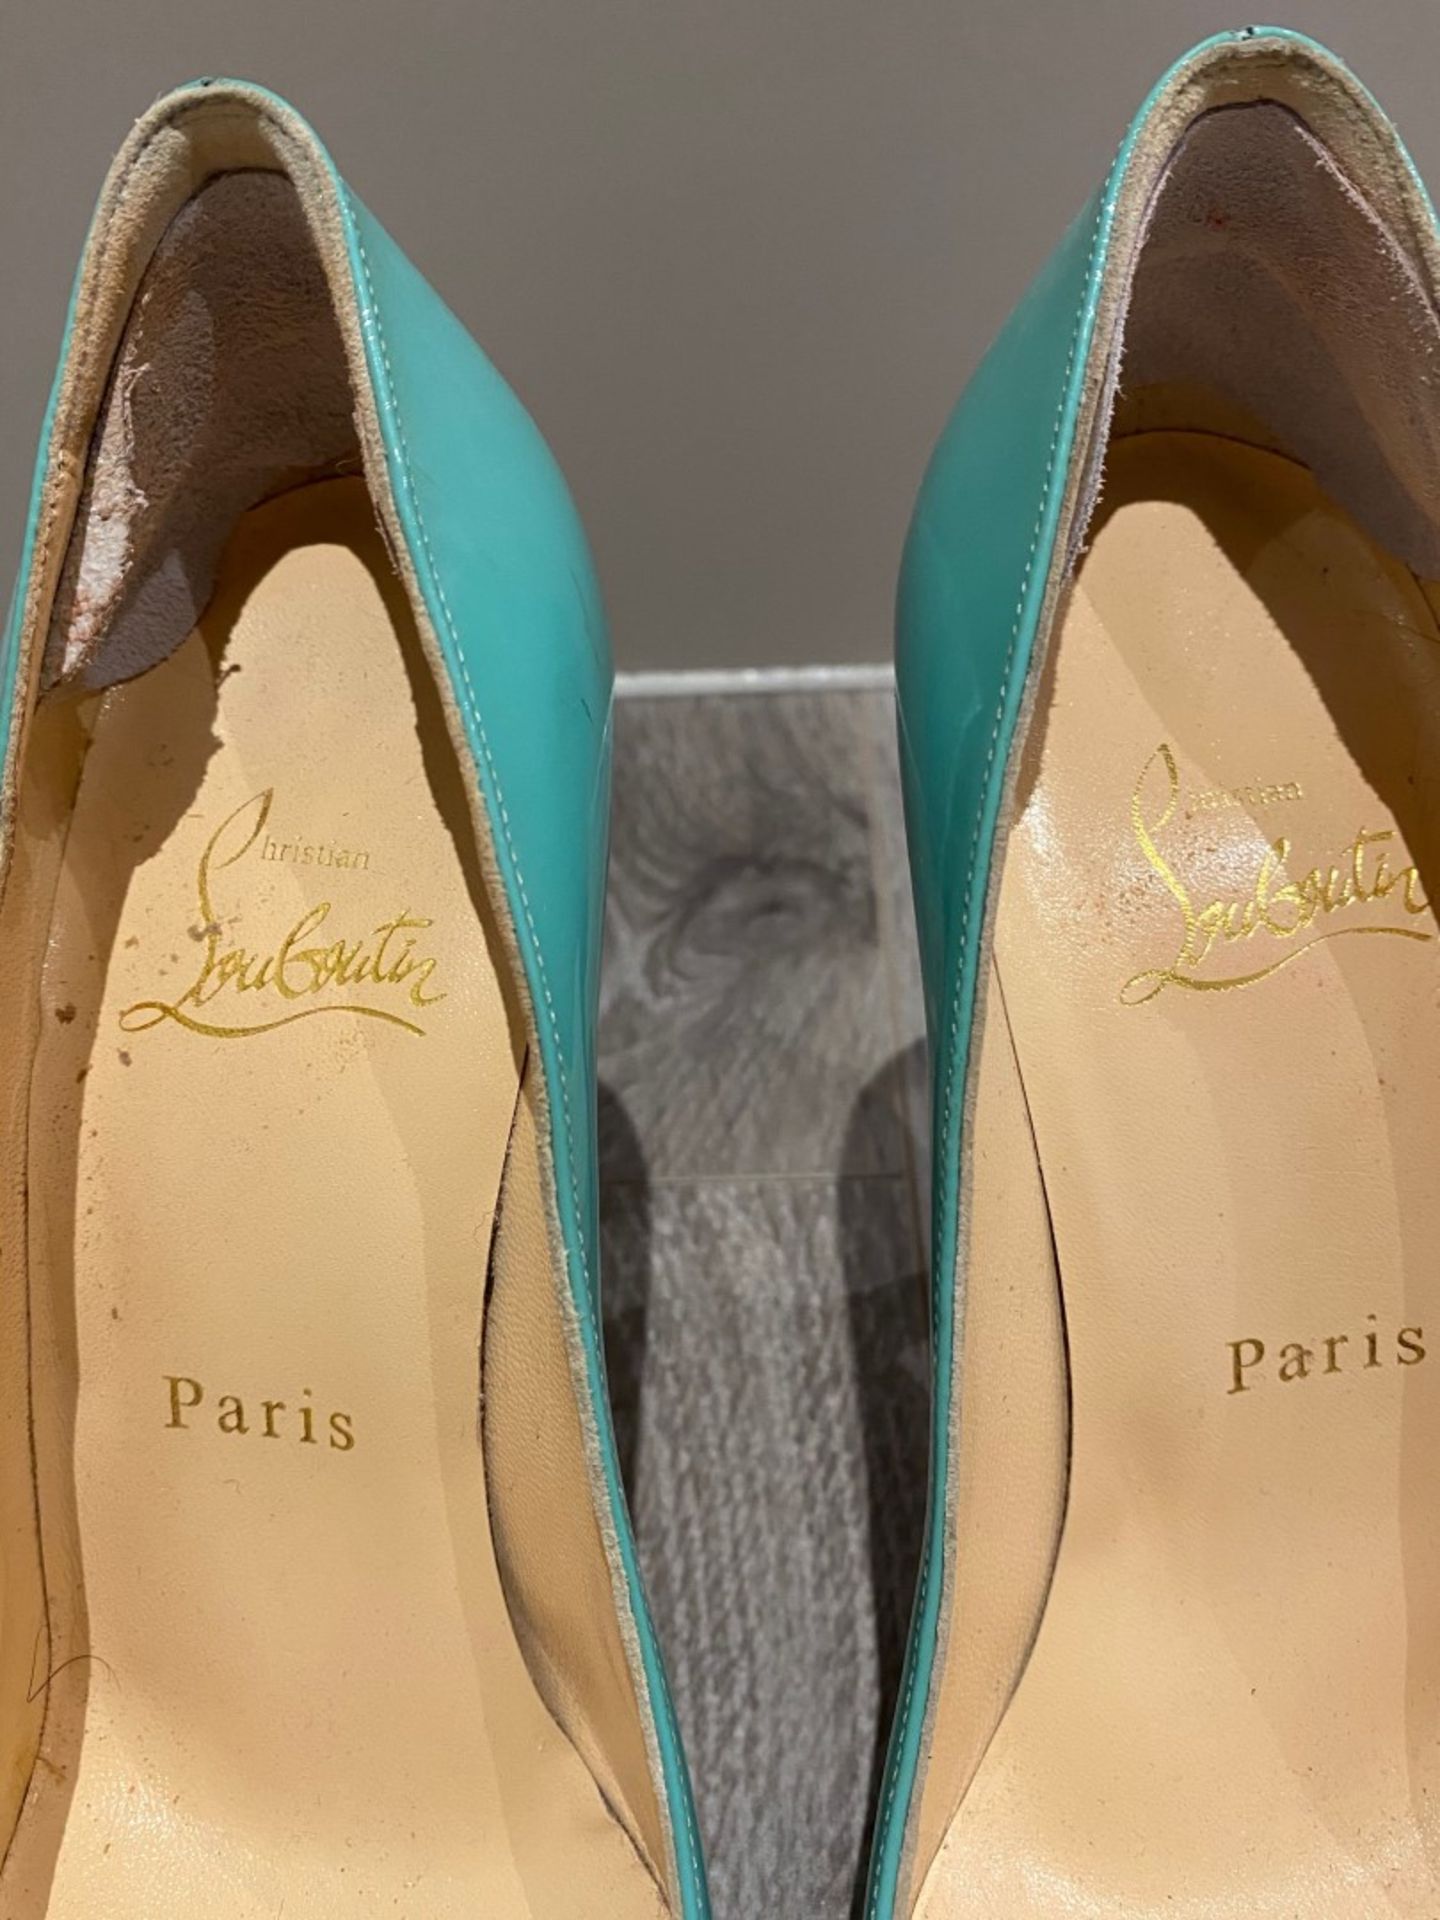 1 x Pair Of Genuine Christain Louboutin High Heel Shoes In Mint Green - Size: 36 - Preowned in Worn - Image 2 of 4